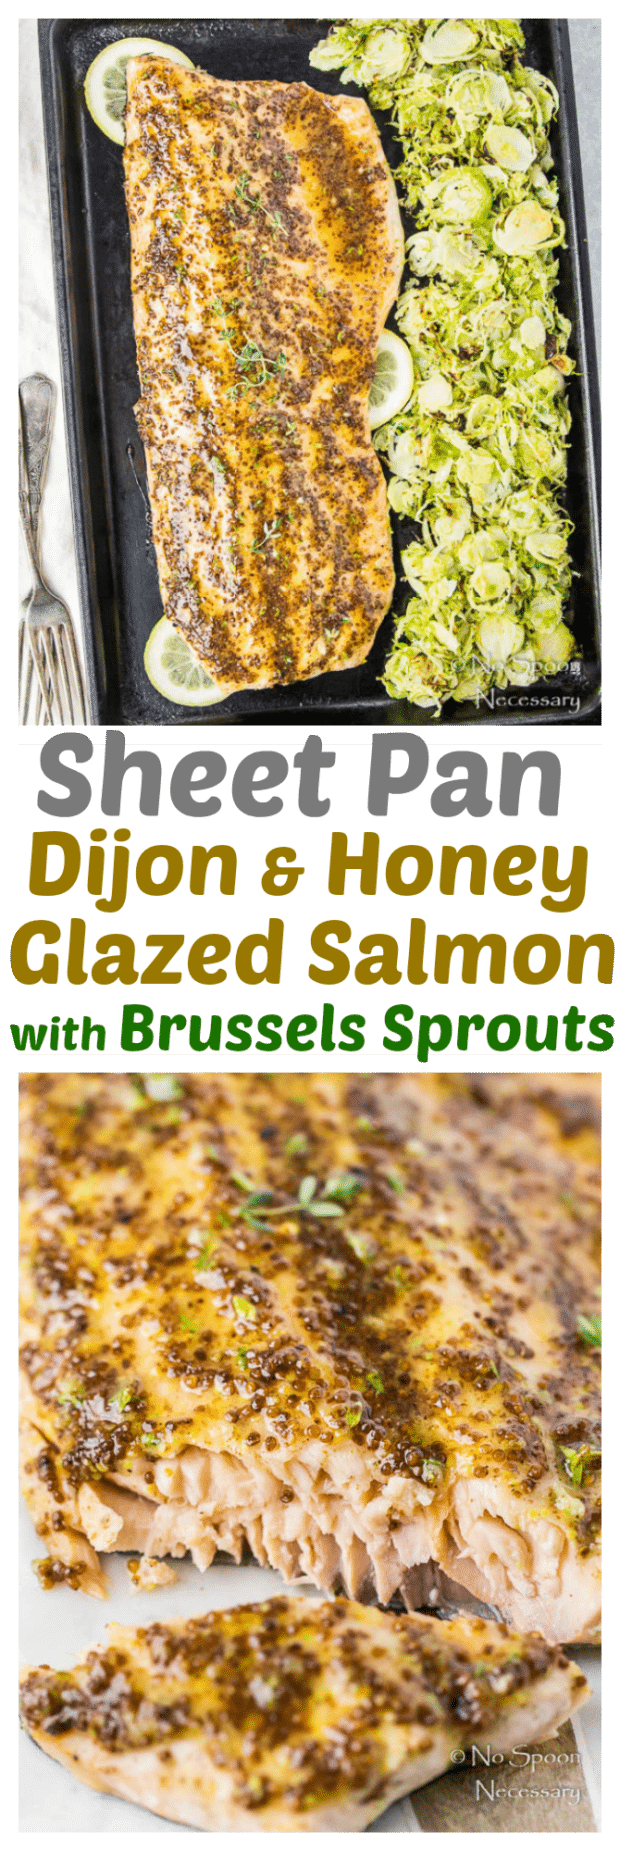 Sheet Pan Dijon & Honey Glazed Salmon with Brussels Sprouts